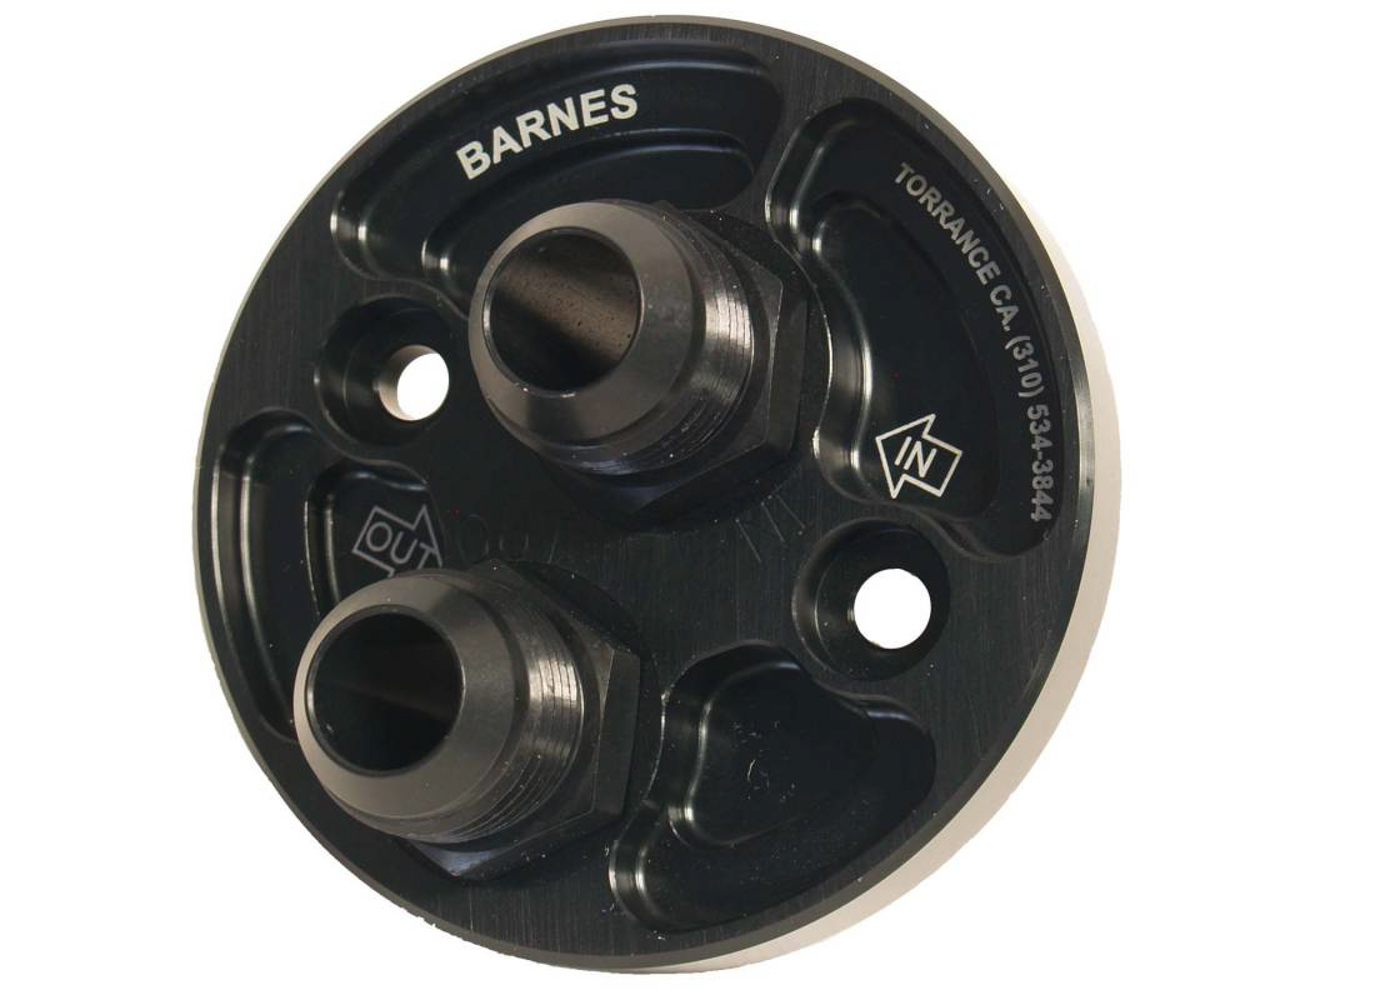 Barnes 8932-12 Oil Filter Adapter, Blockoff, Bolt-On, 12 AN Male Inlet, Aluminum, Black Anodized, Small Block Chevy, Each